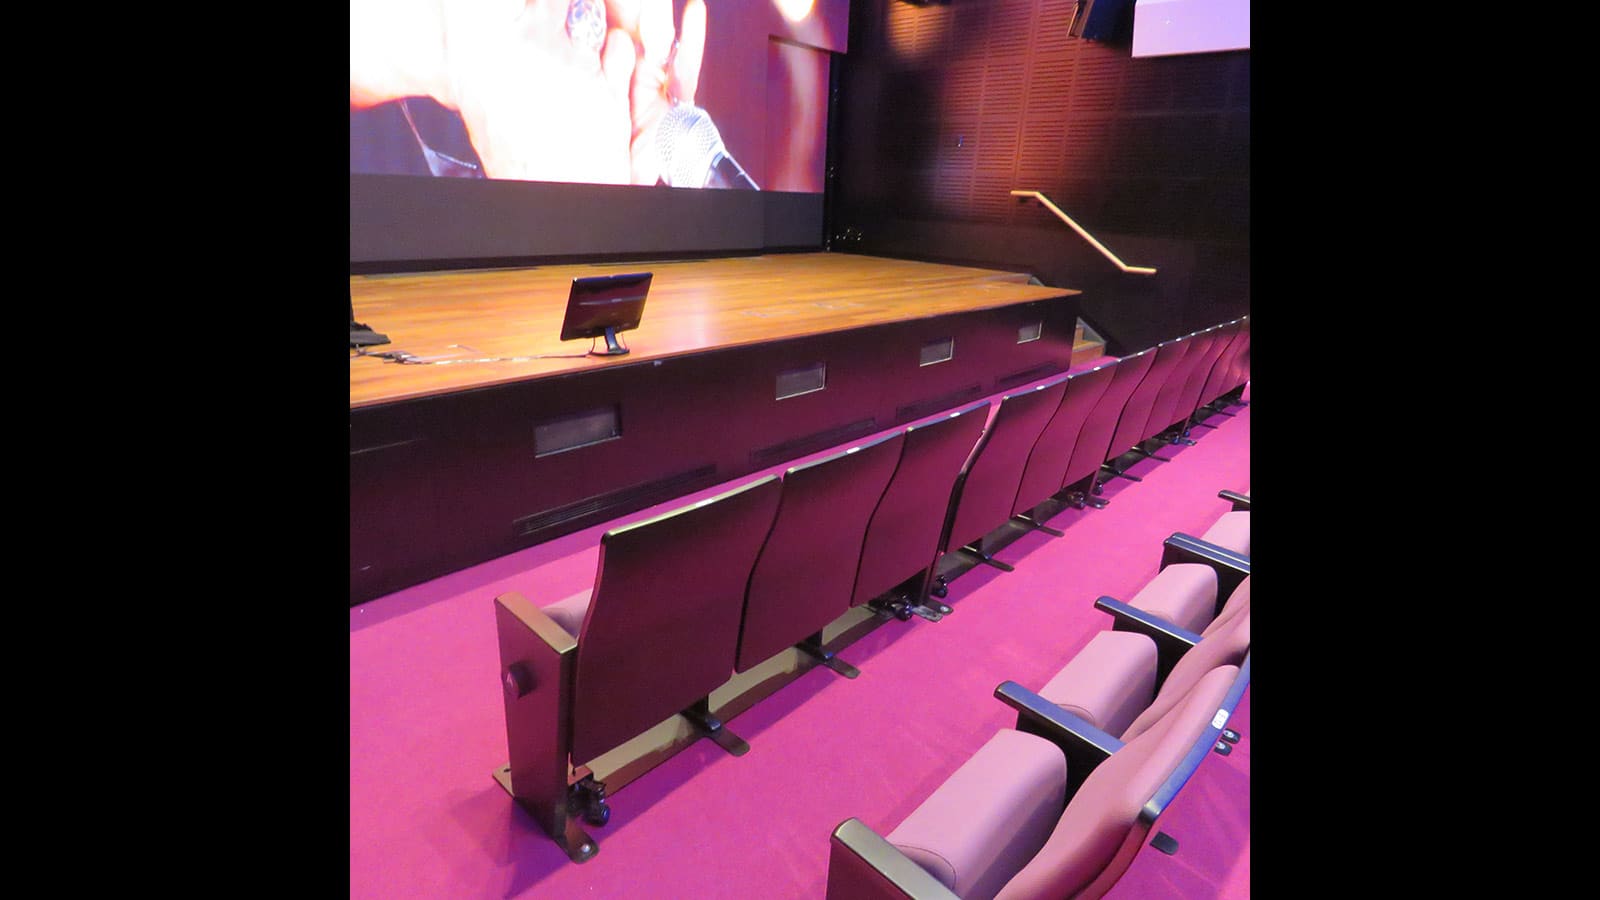 Telstra Showcases Technology Leadership with Meyer Sound Constellation at Corporate Headquarters in Australia